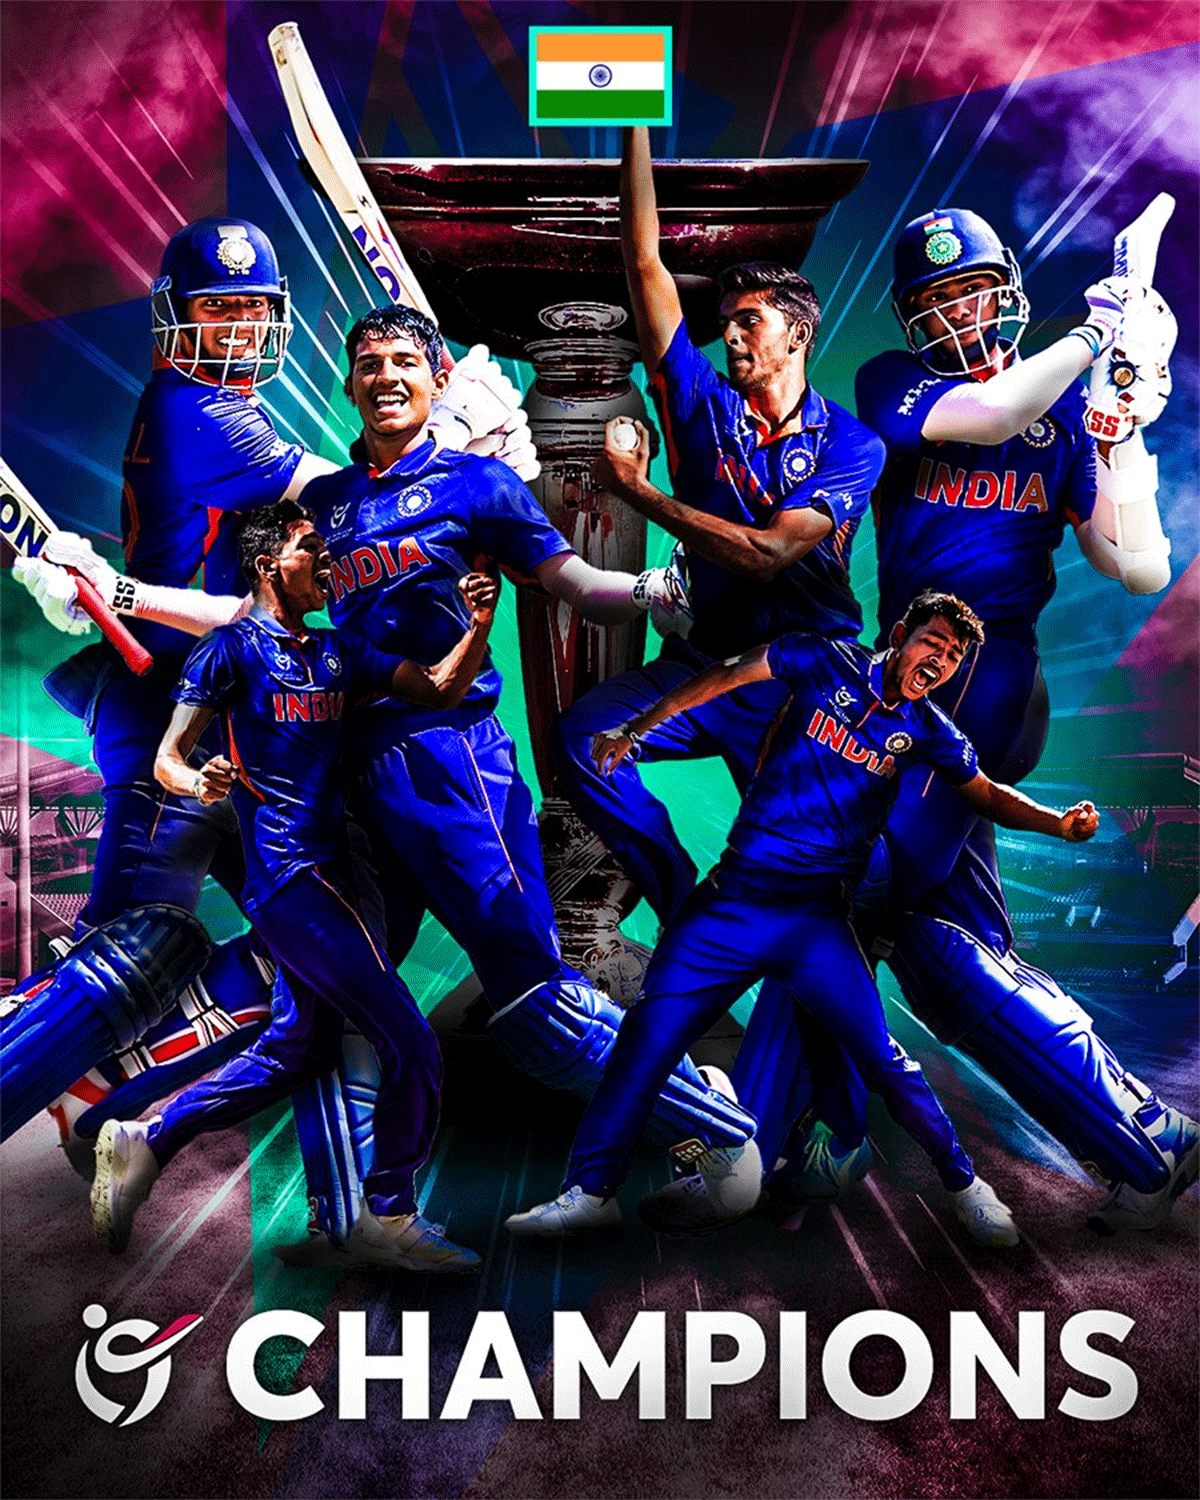 India won the Under-19 World Cup on Saturday